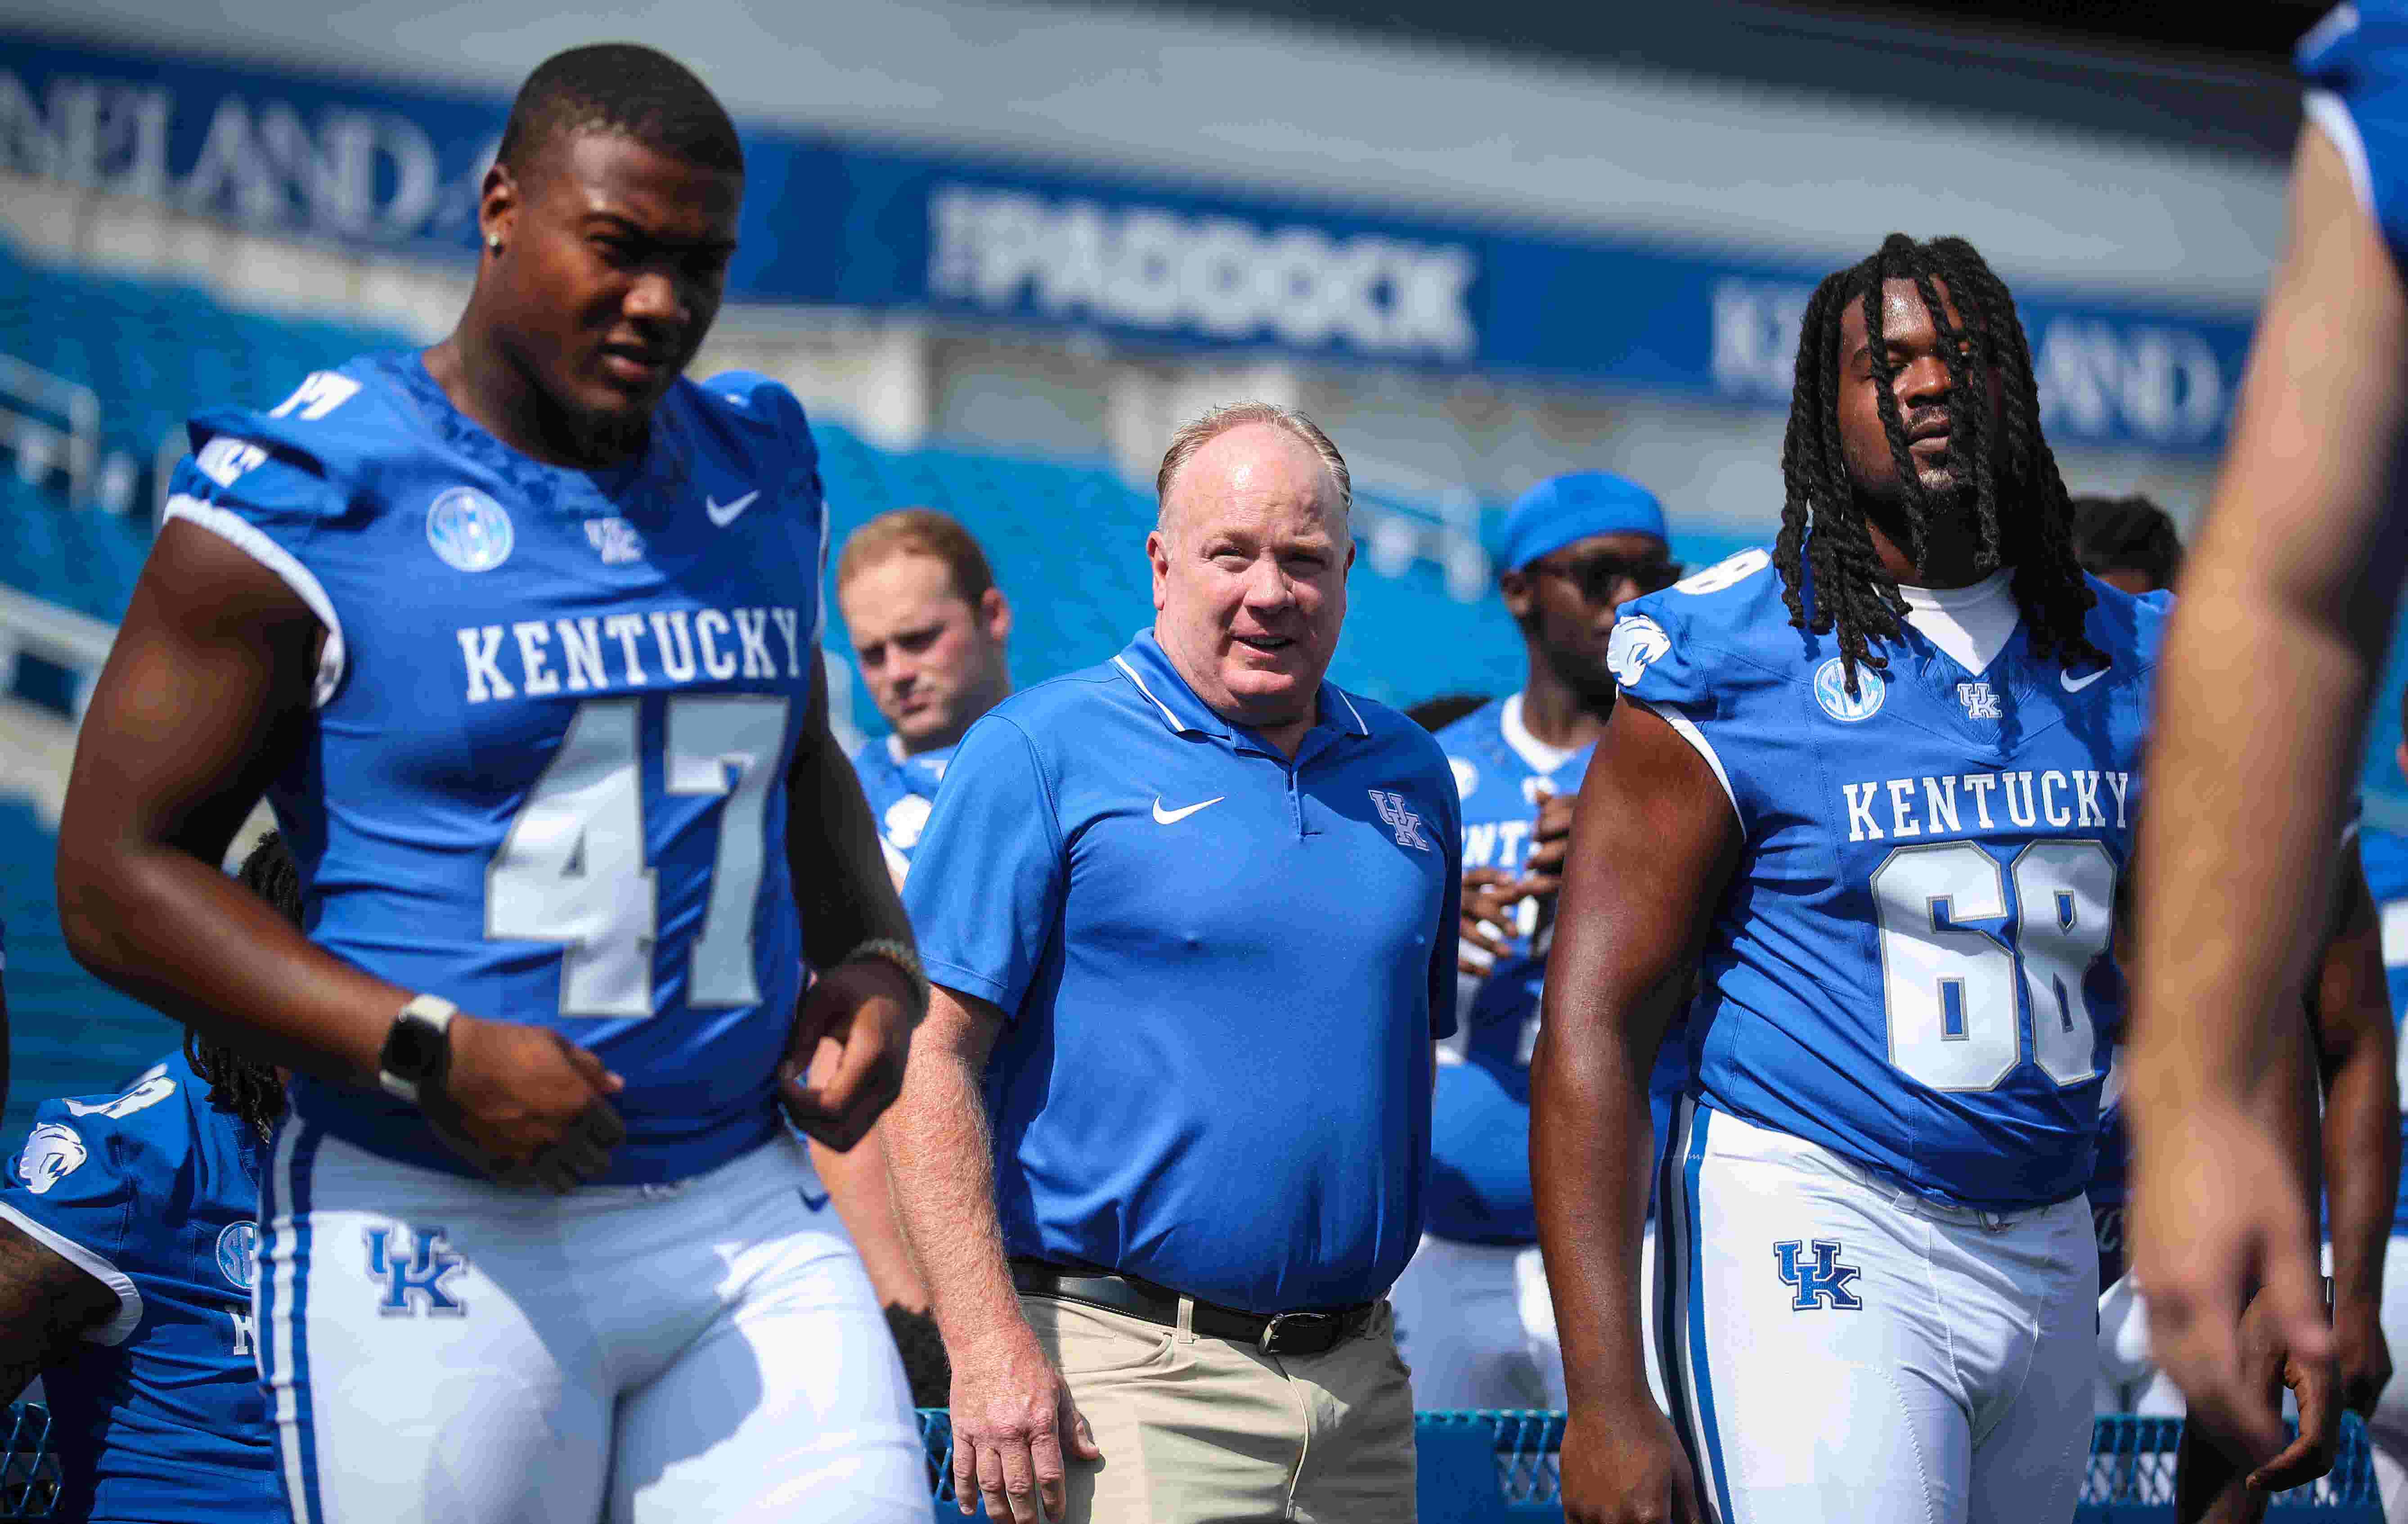 Kentucky football coach Mark Stoops says OC Liam Coen is 'proven'\nand transfer QB Devin Leary brings leadership